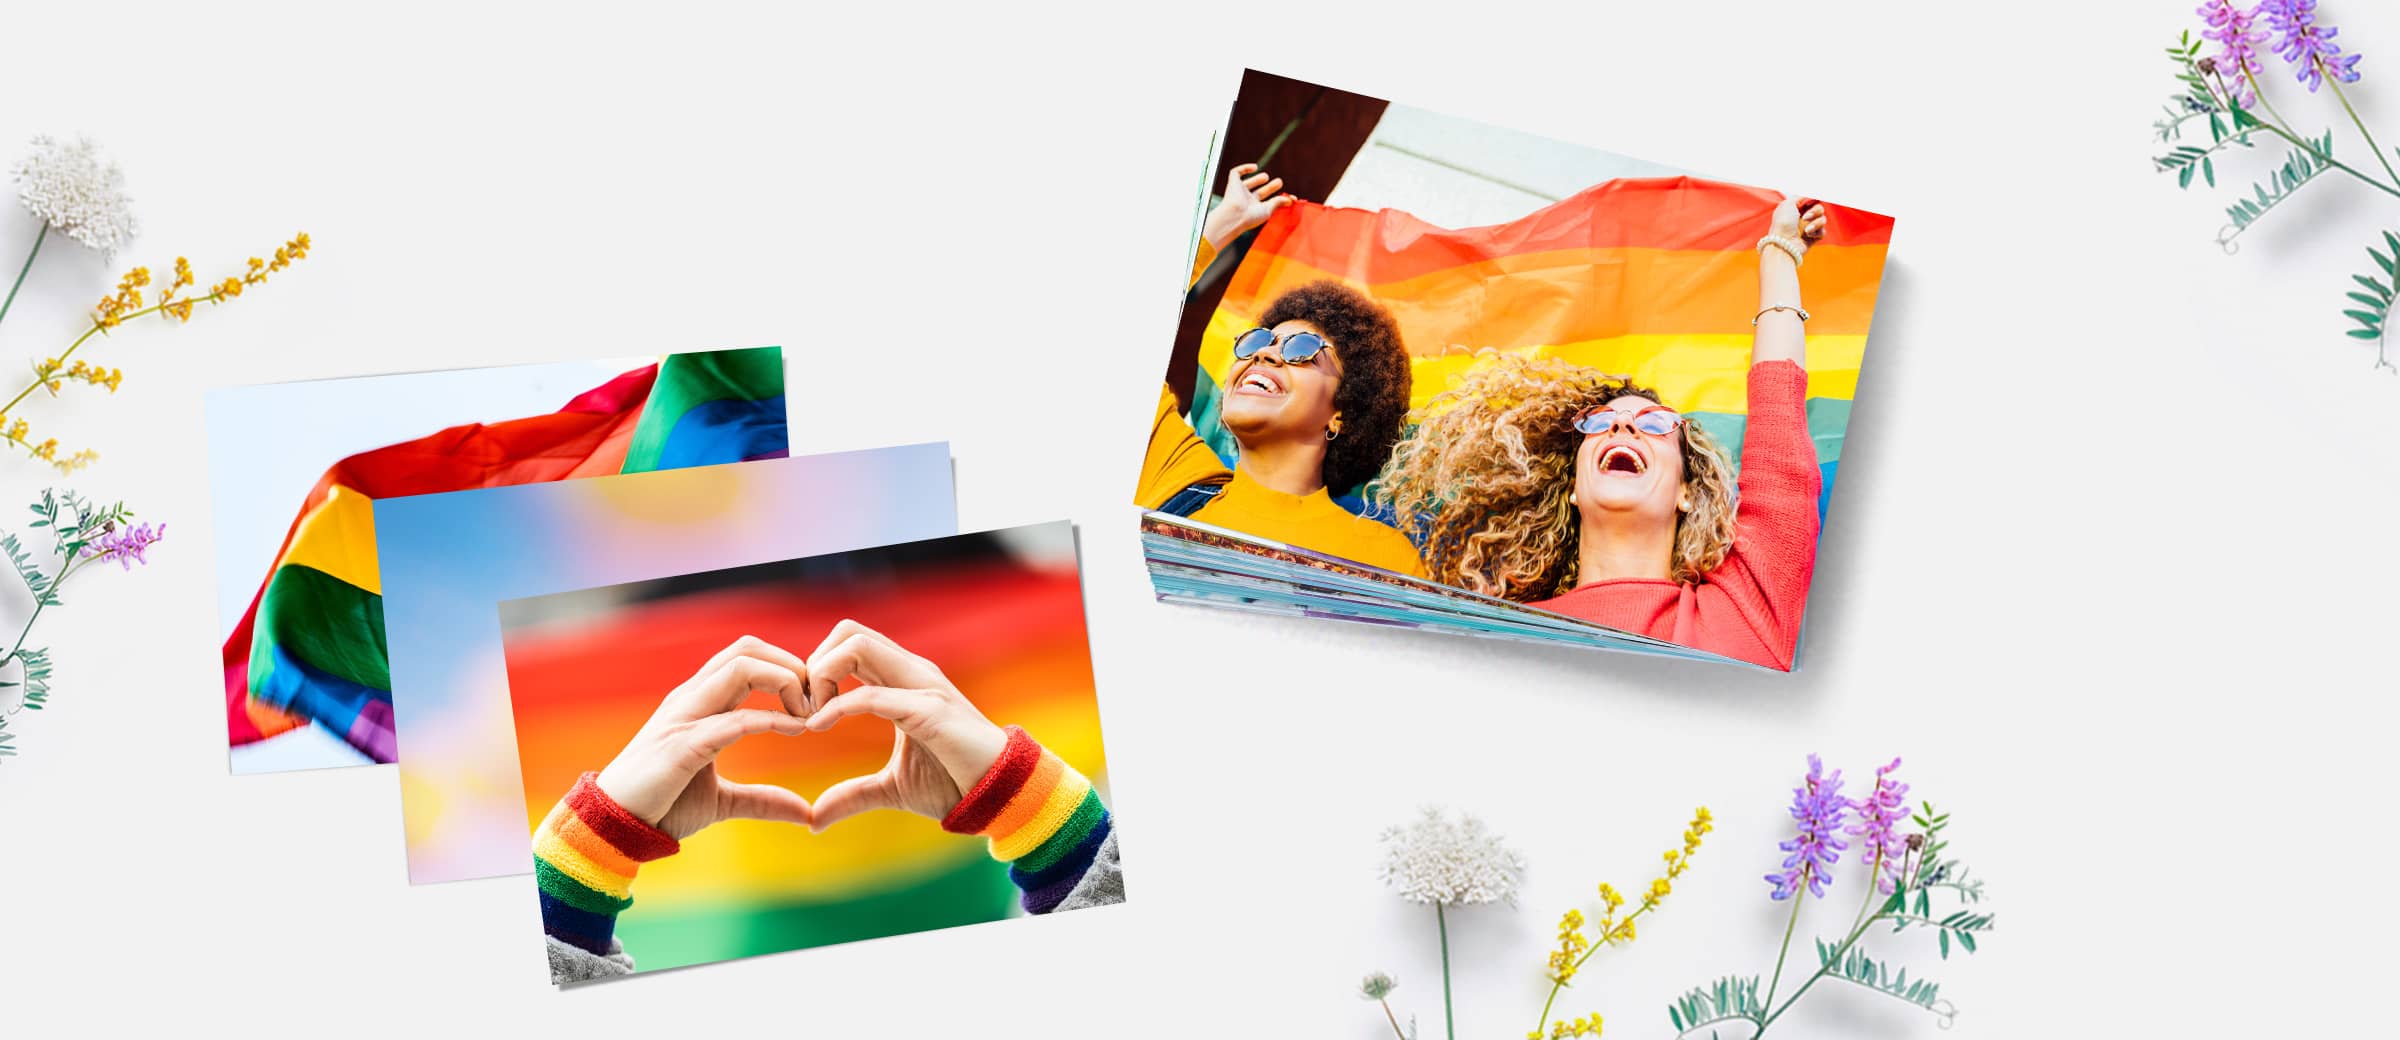 CVS Photo products with Pride themes